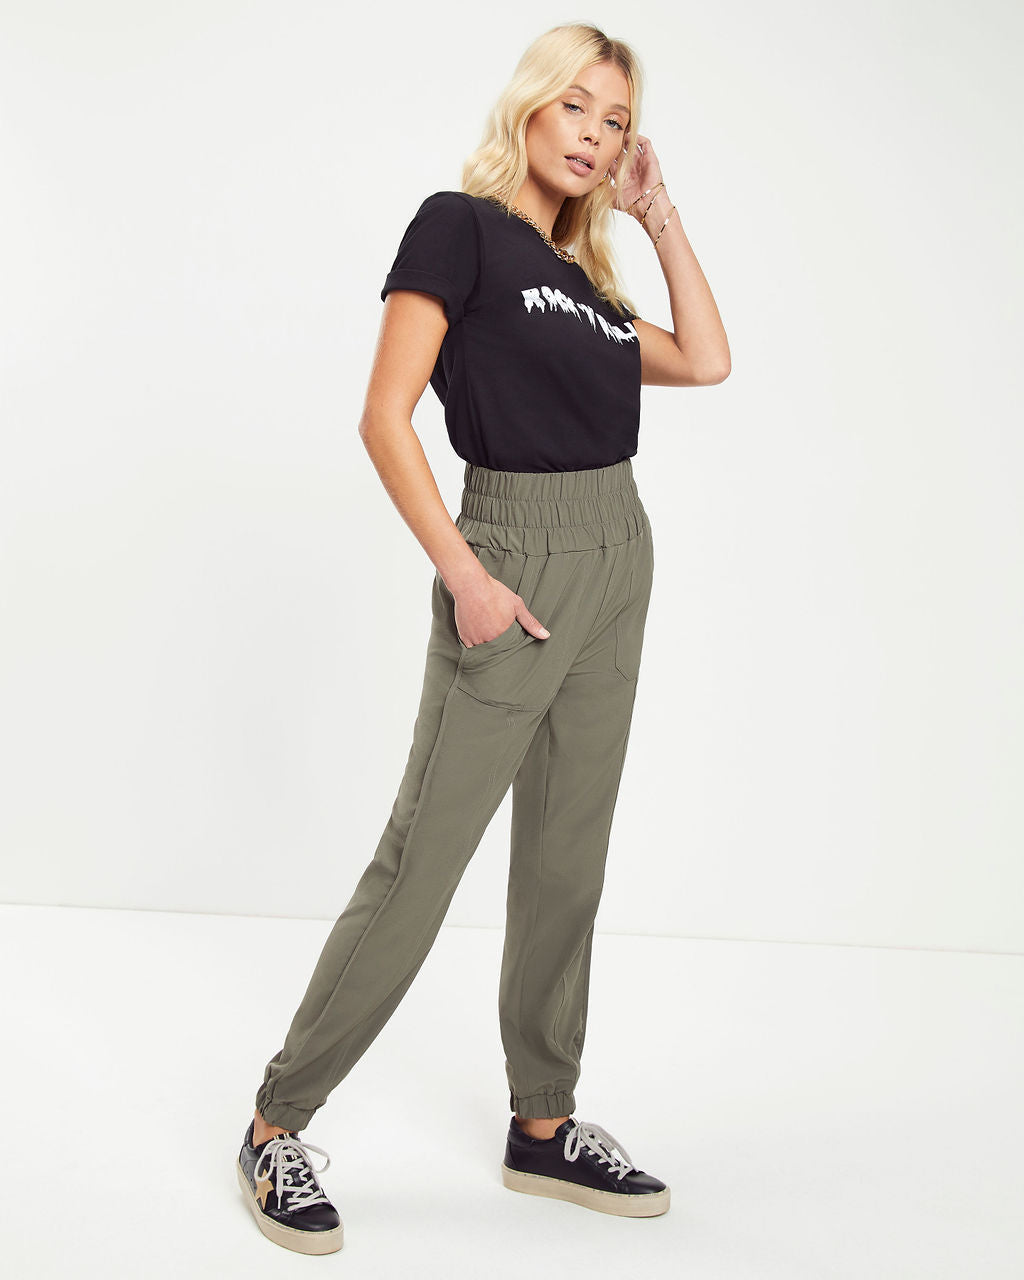 Chill Out Days Pocketed Jogger Pants - Olive